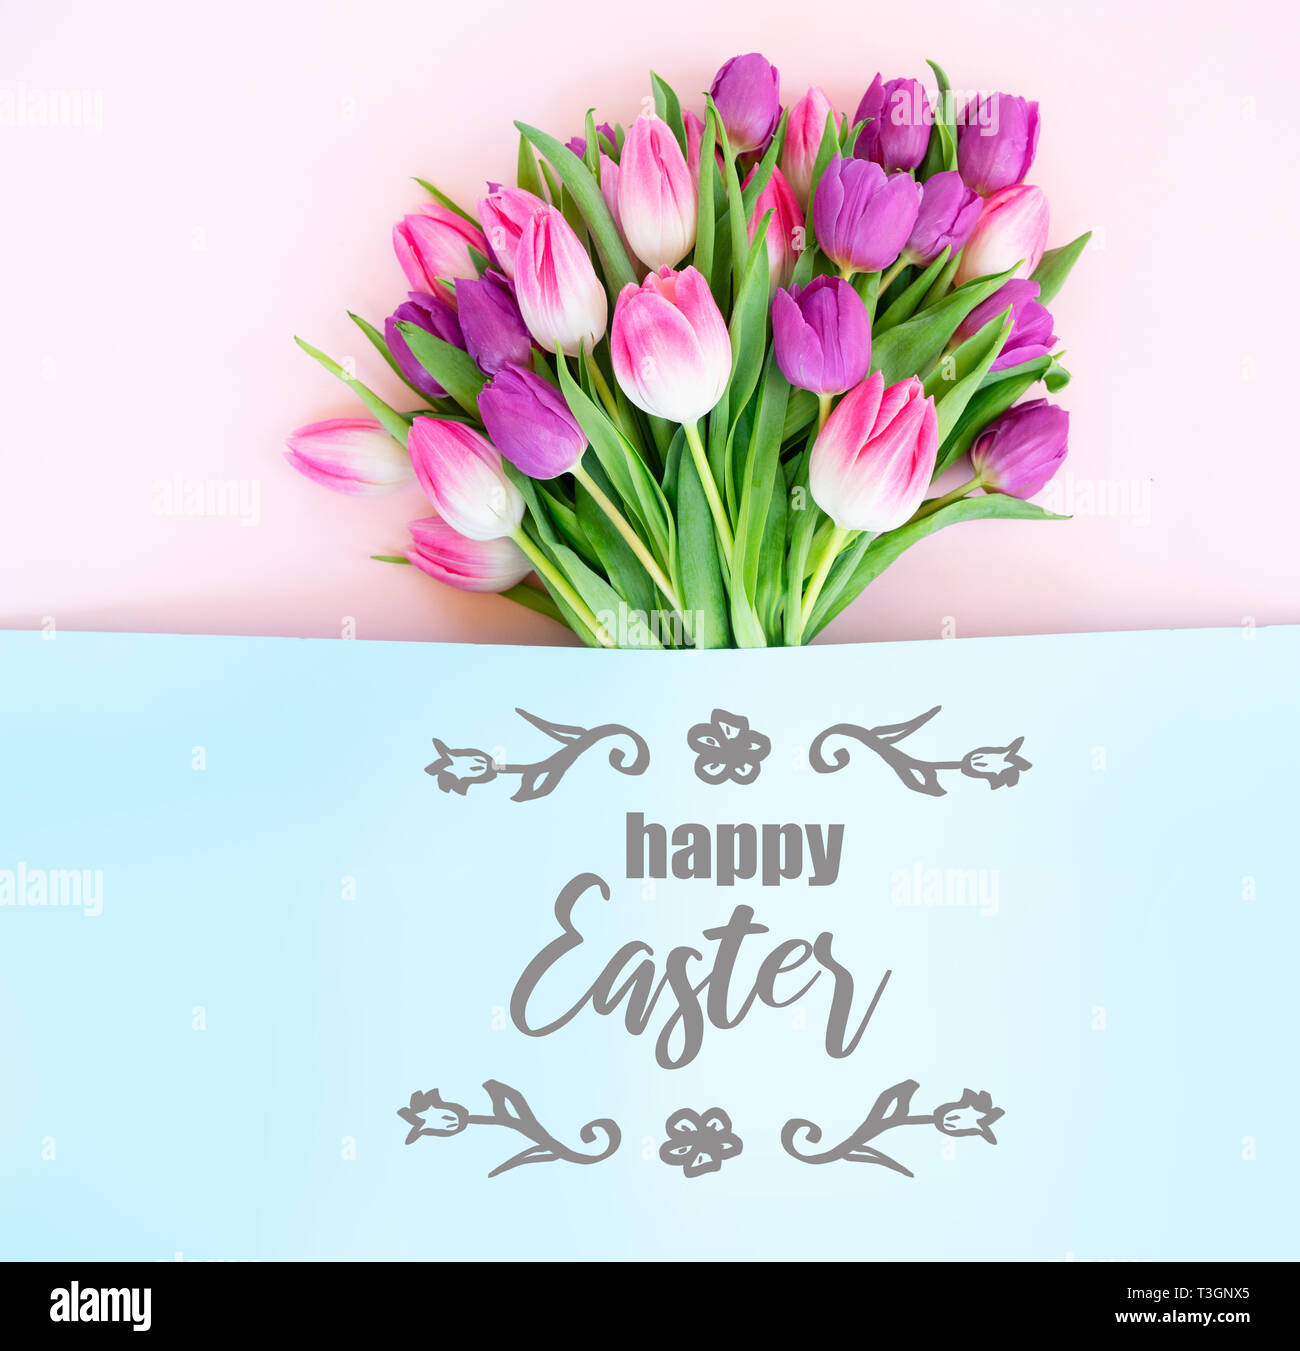 Bouquet of pink and violet tulip flowers on bicolored background, flat lay top view scene with happy Easter greeting Stock Photo